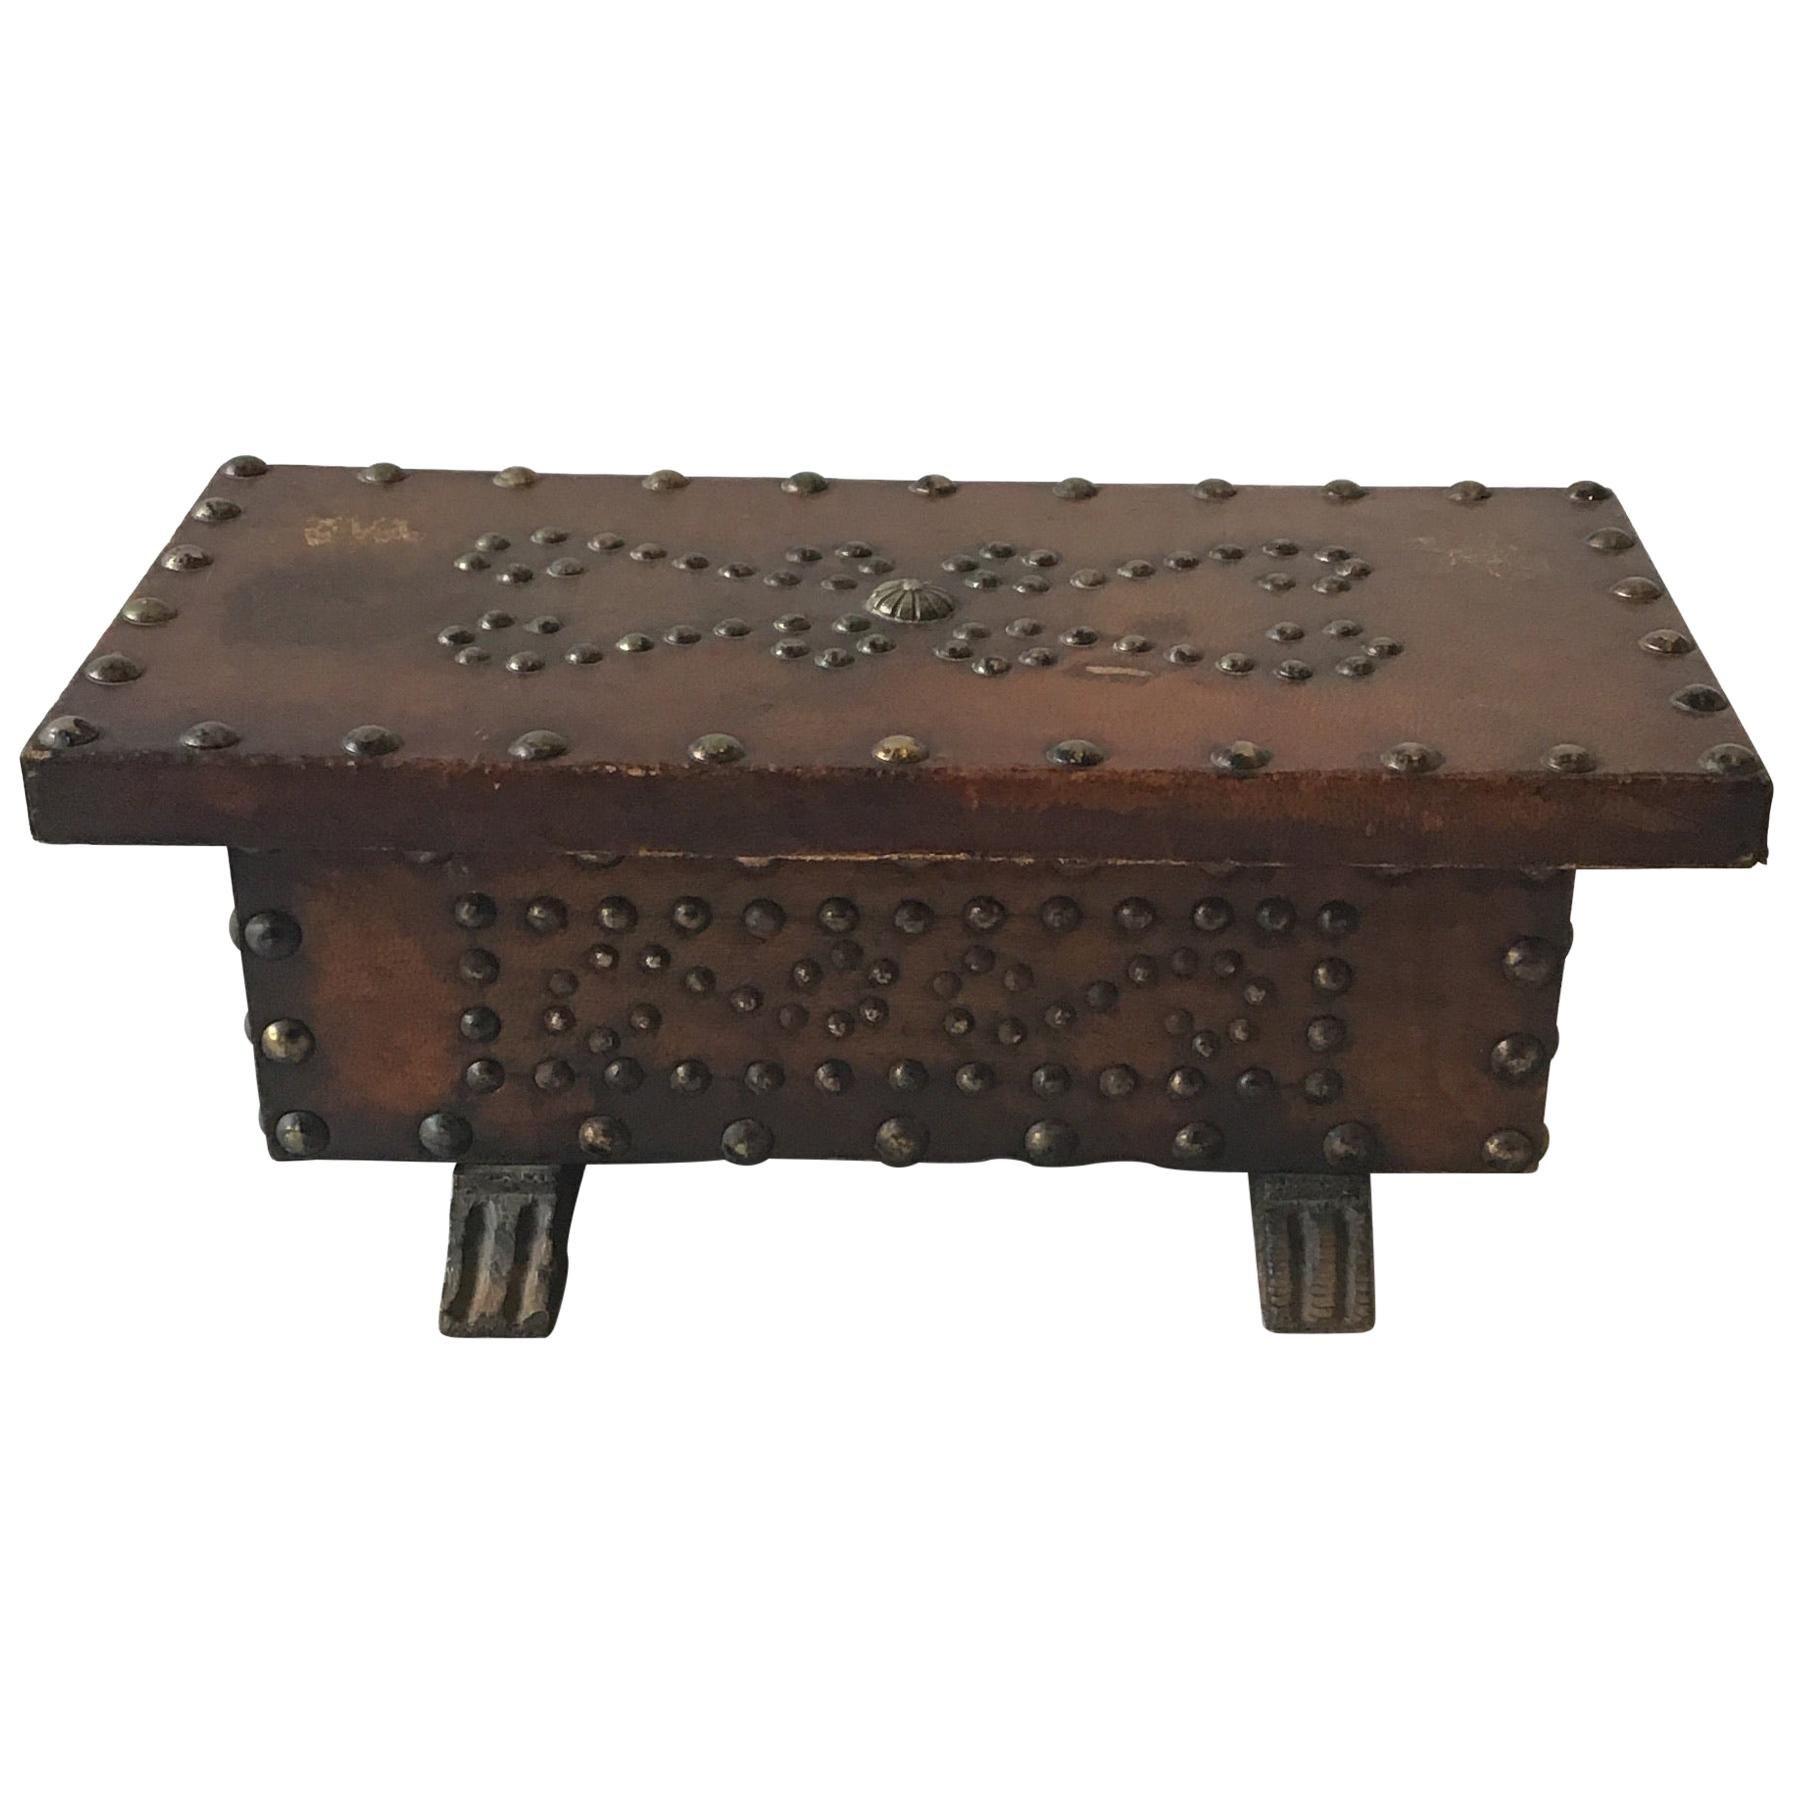 1960s Leather Studded Wood Box